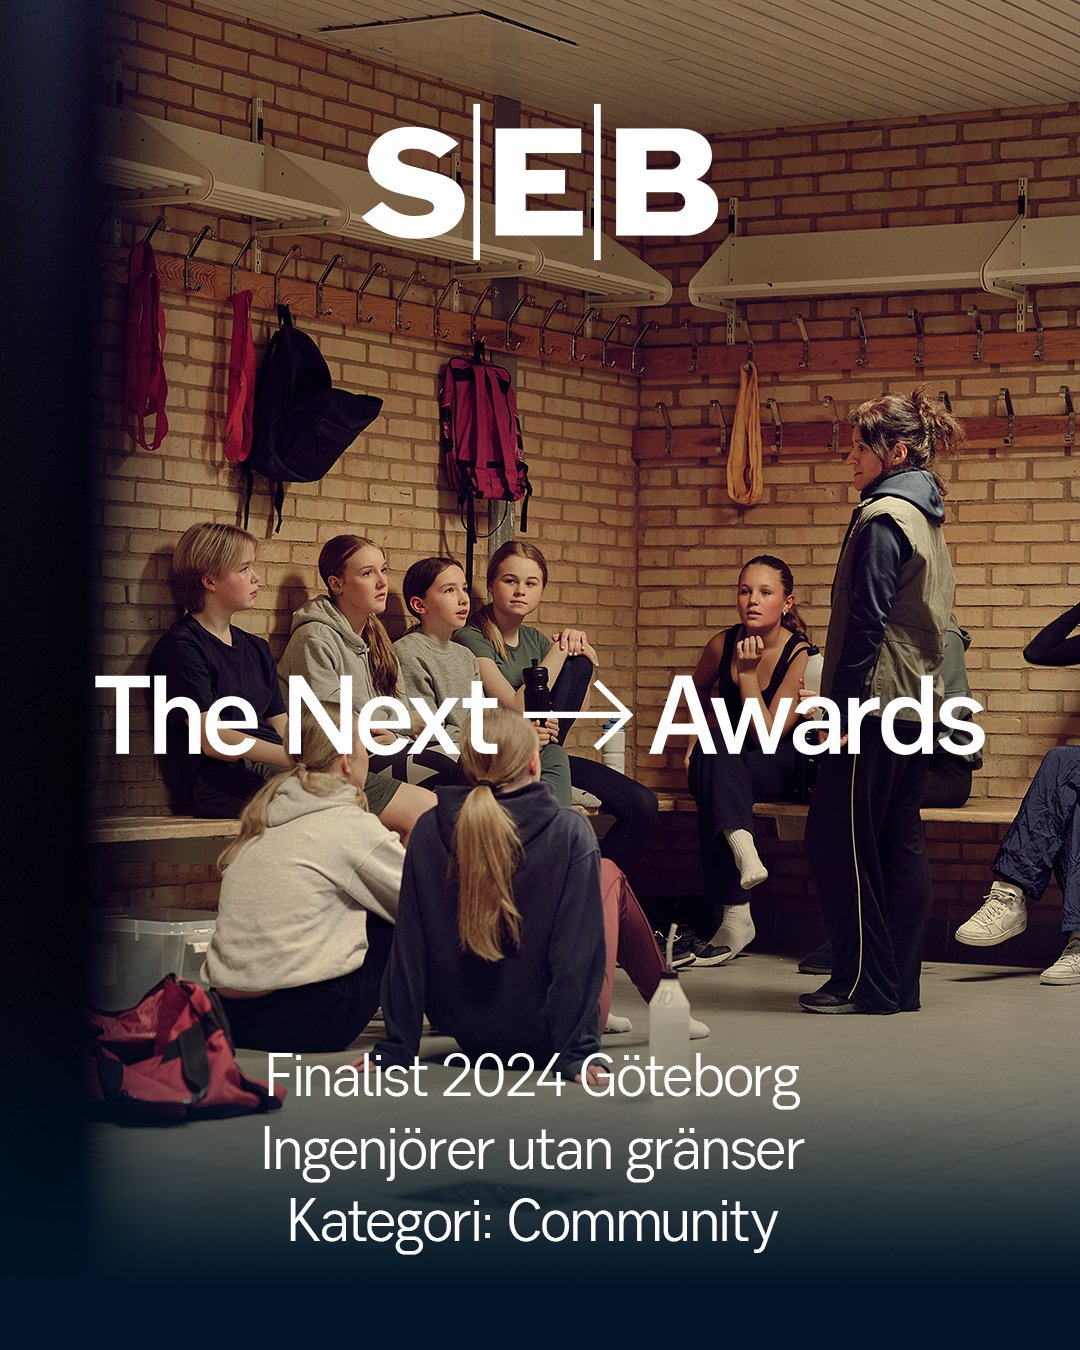 🌍 Exciting News! 🌍 We are thrilled to announce that Engineers Without Borders Sweden has advanced to one of the four semi-finals of The Next Awards in the &quot;Community&quot; category! 

This prestigious competition celebrates sustainable entrepr